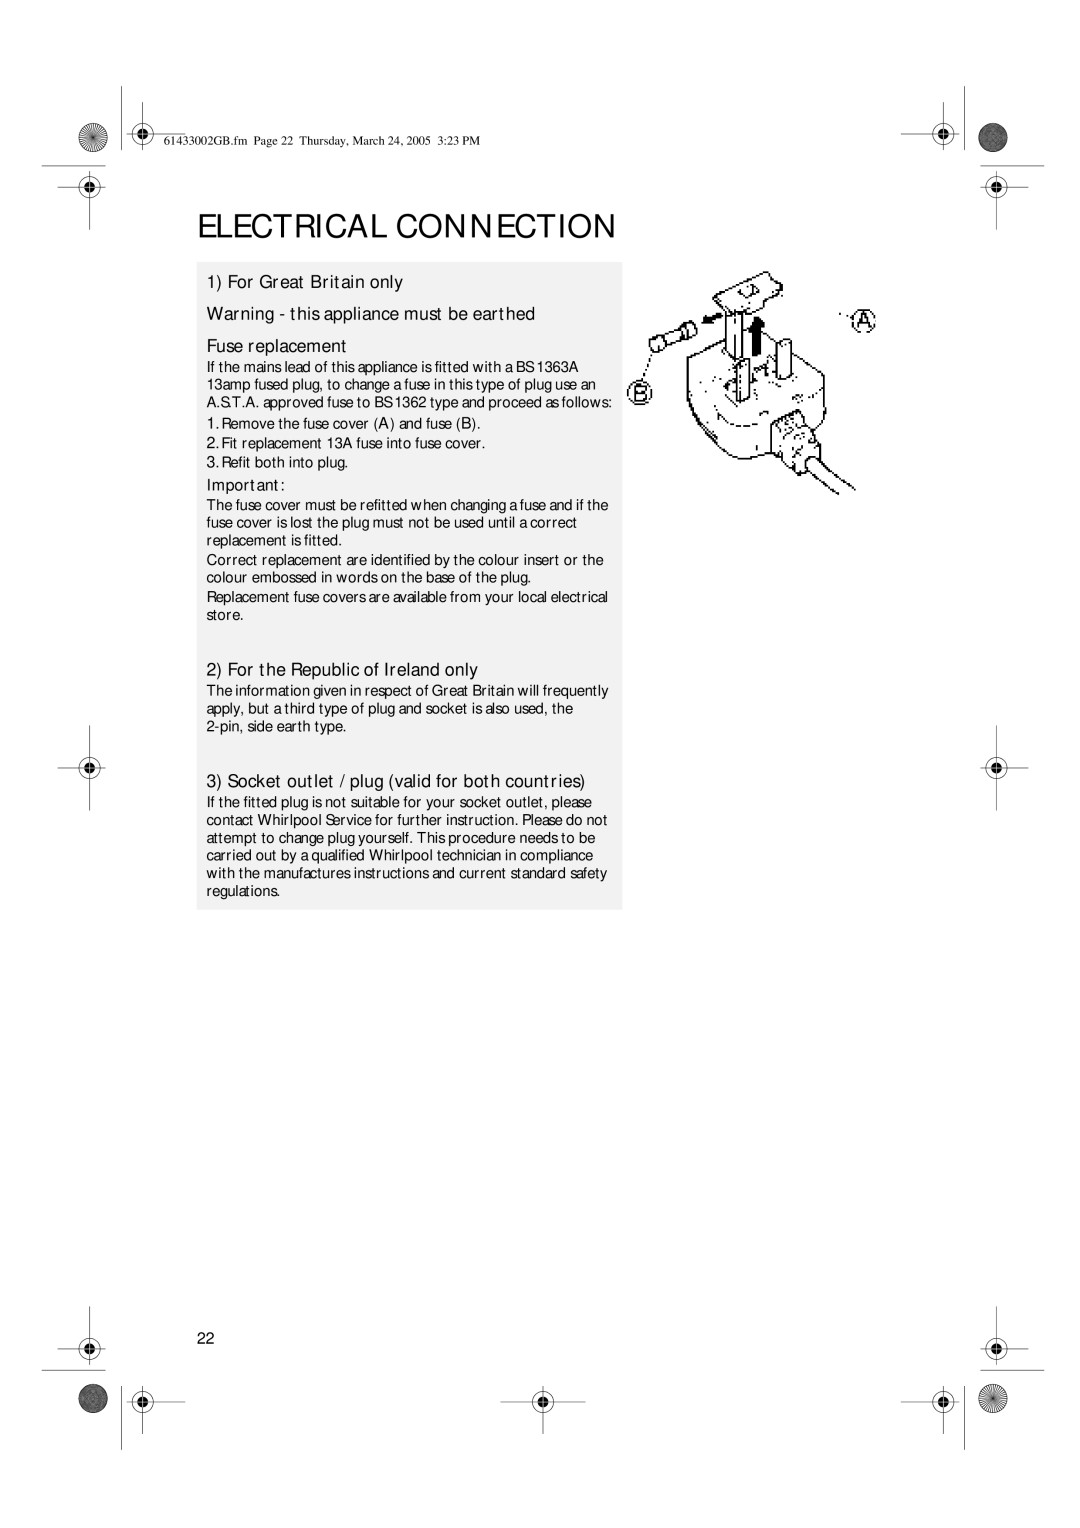 CDA FW480 manual Electrical Connection, For Great Britain only Warning - this appliance must be earthed, Fuse replacement 